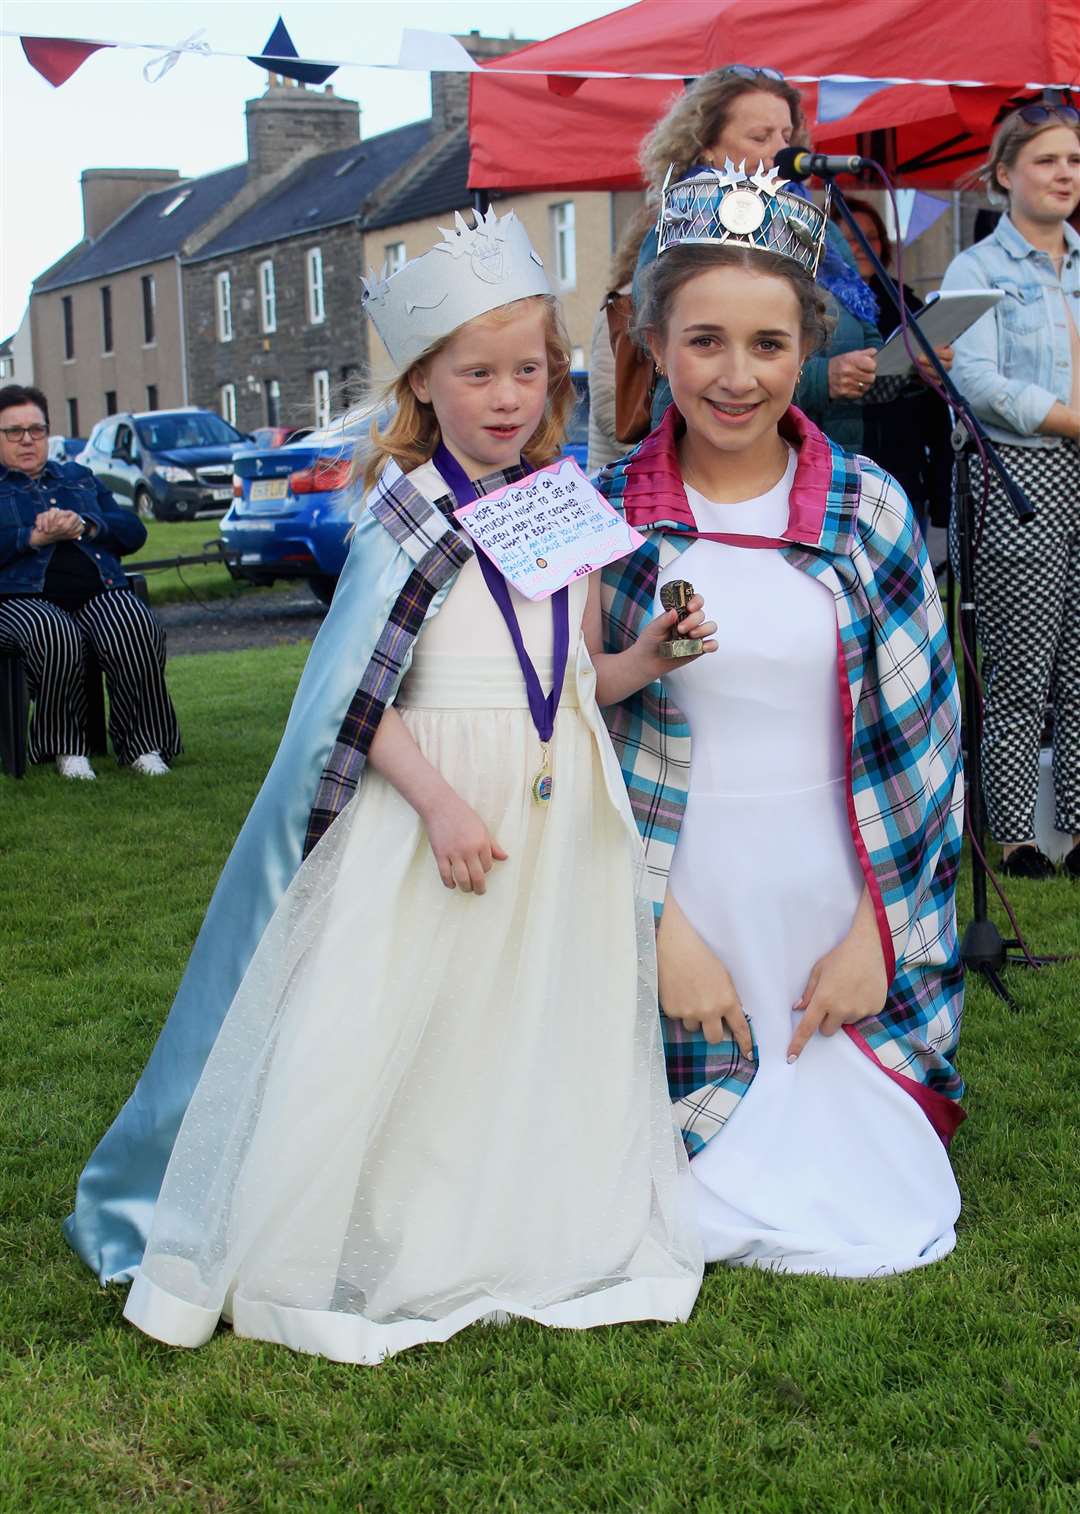 Gala queens at the double: Abby Dunbar, Wick's 2023 gala queen, with six-year-old Dakota McBeth, one of the winners in the fancy-dress parade. Picture: Alan Hendry